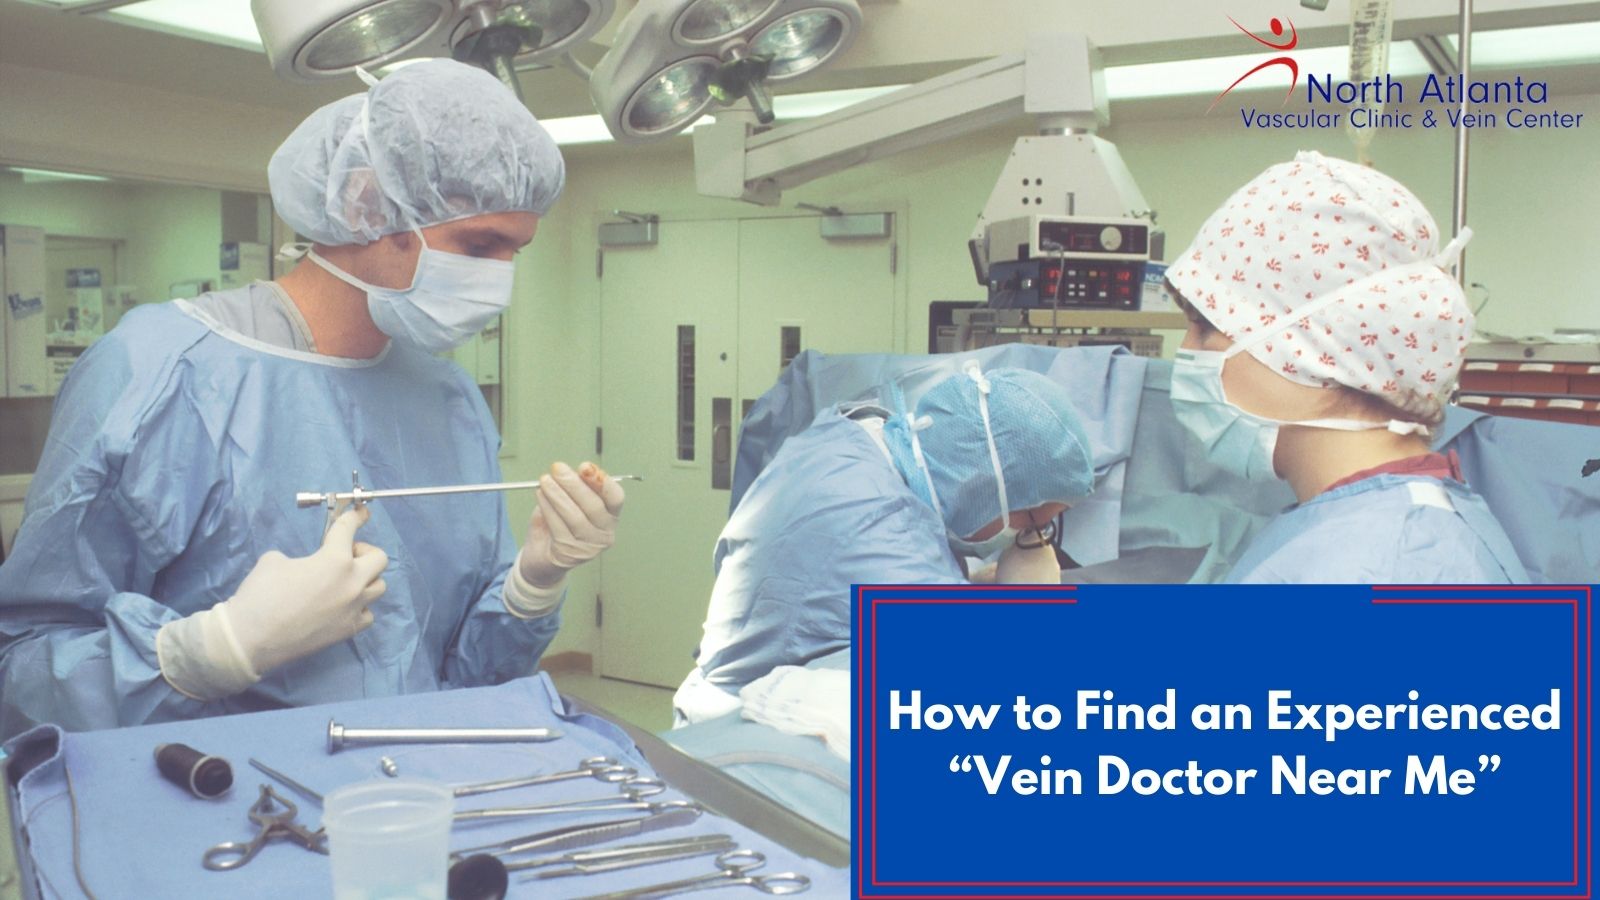 How to Find an Experienced “Vein Doctor Near Me”